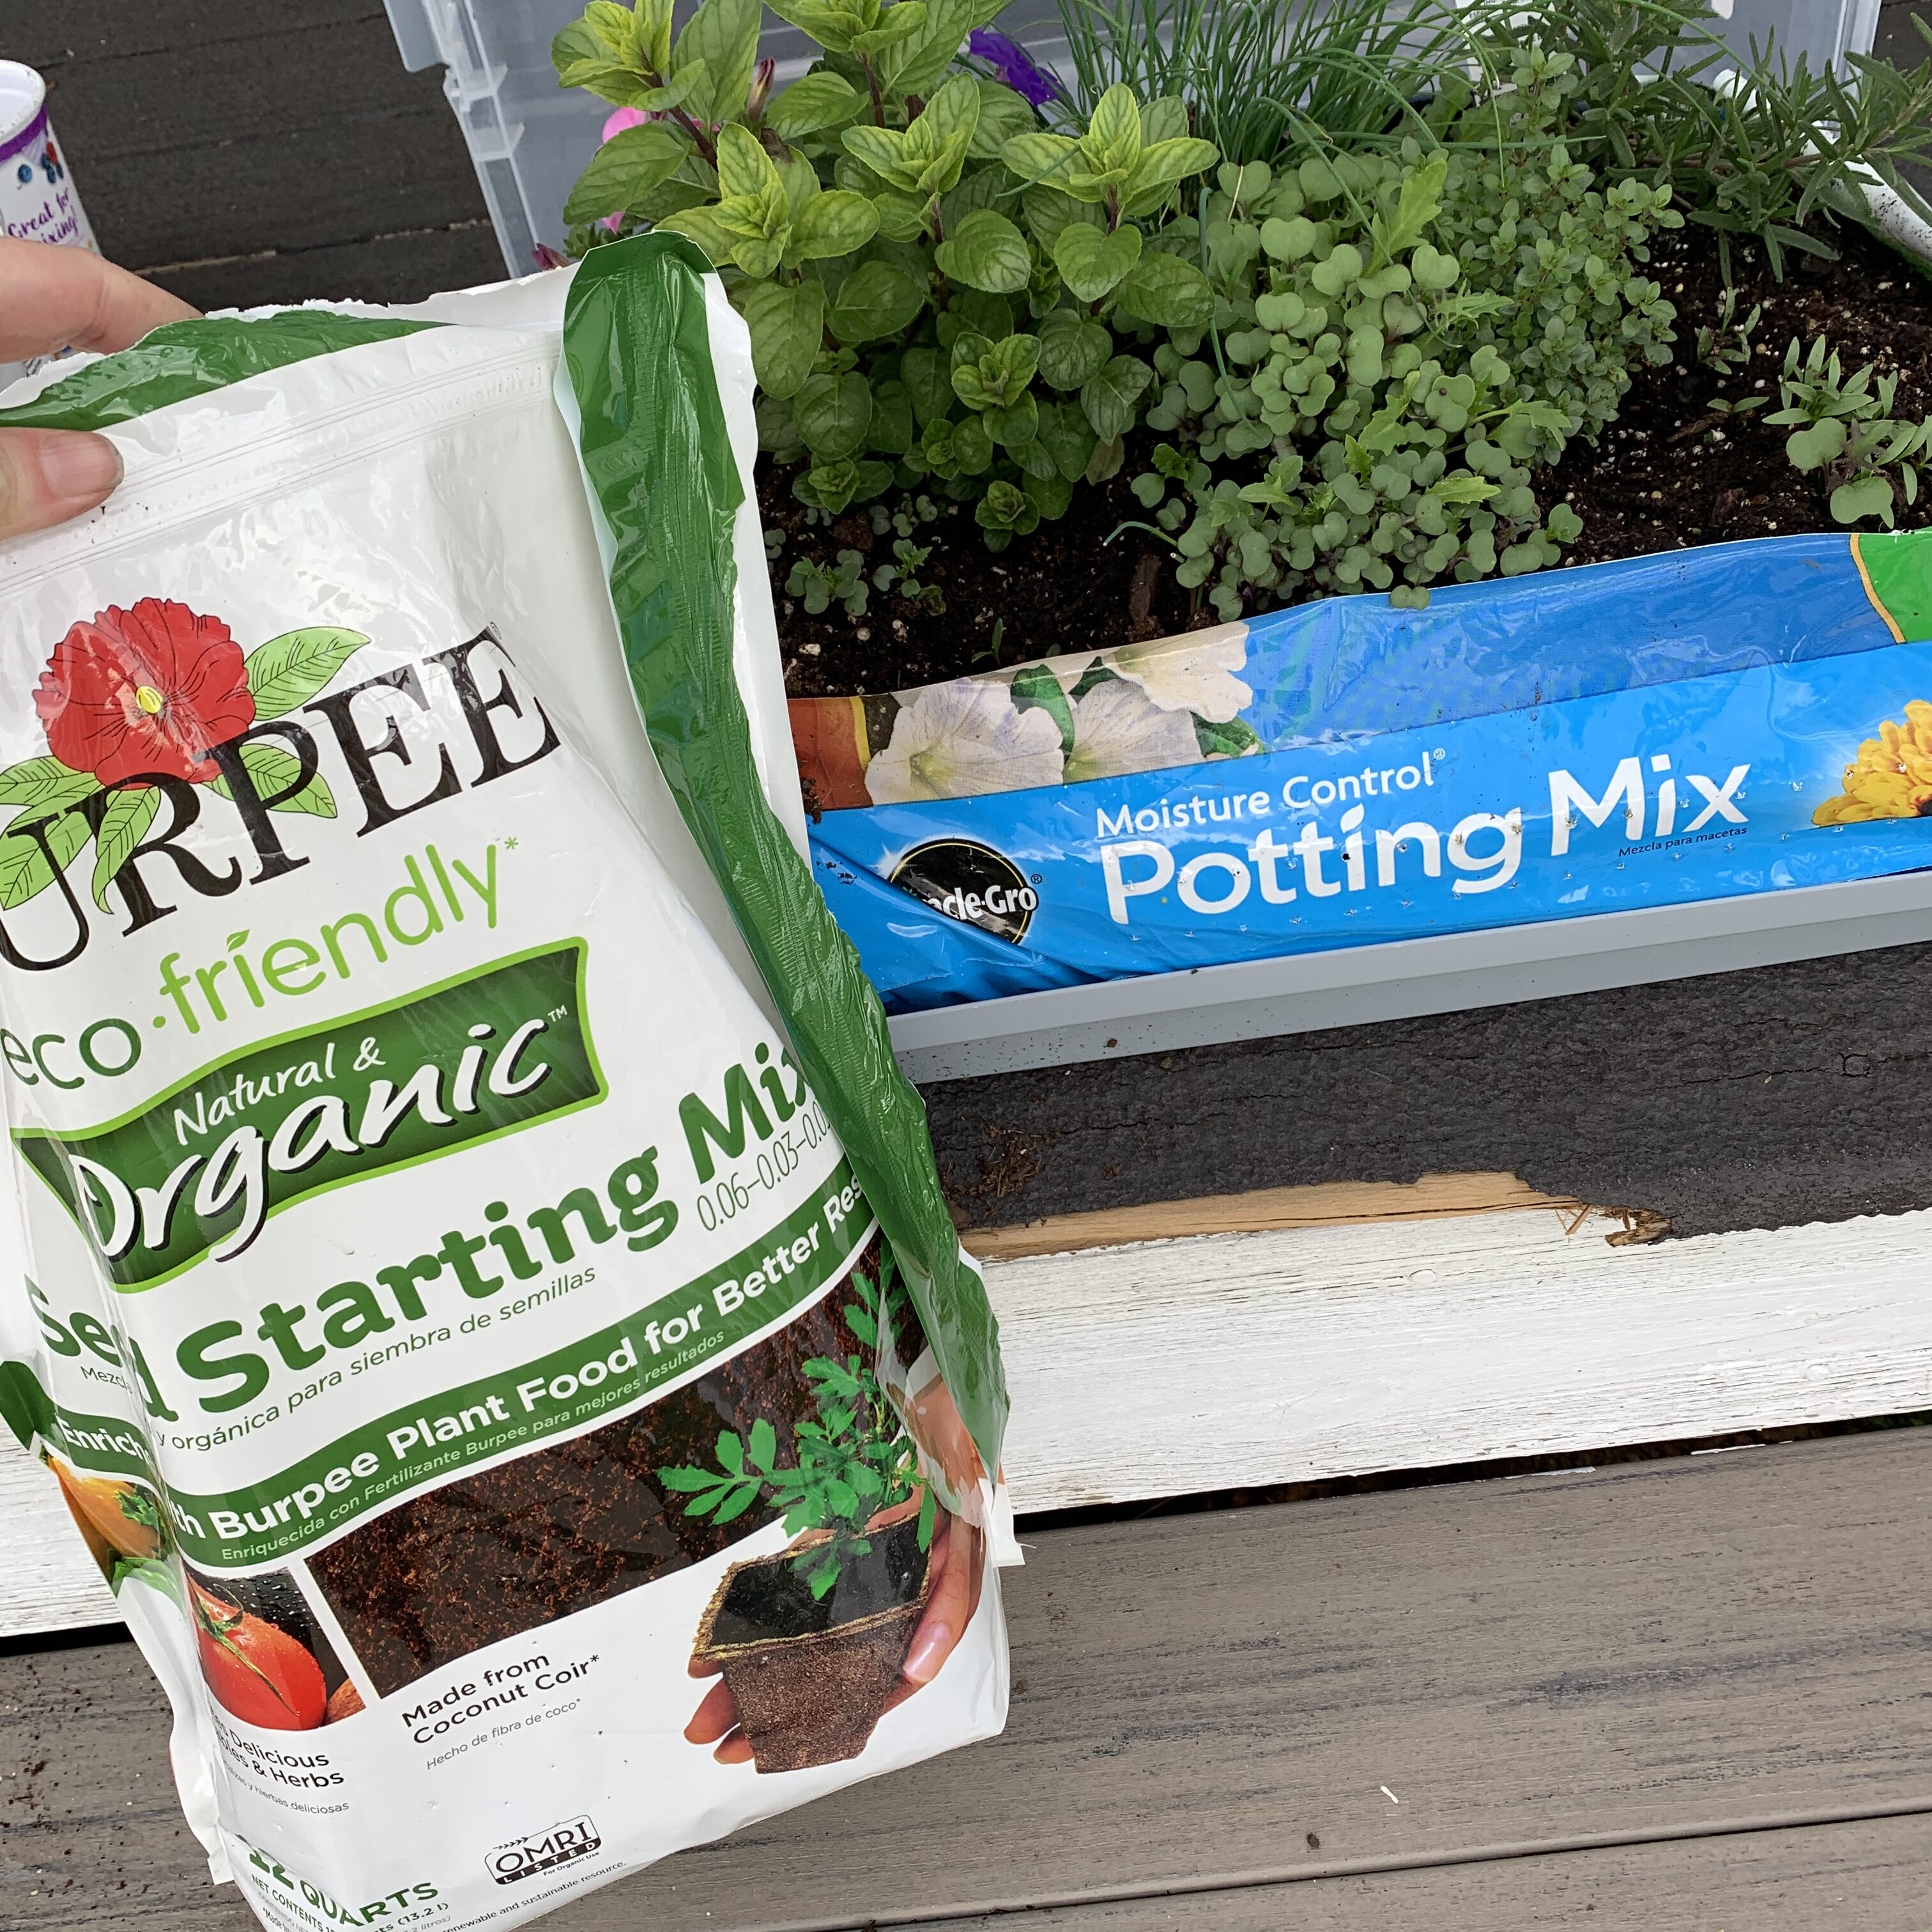 7BBBA1AB A805 46C7 8A31 068EA1B2E2AD Comparing Burpee Organic Seed Starting Mix vs Miracle Gro Moisture Control Potting Mix for transplanted tomato seedlings